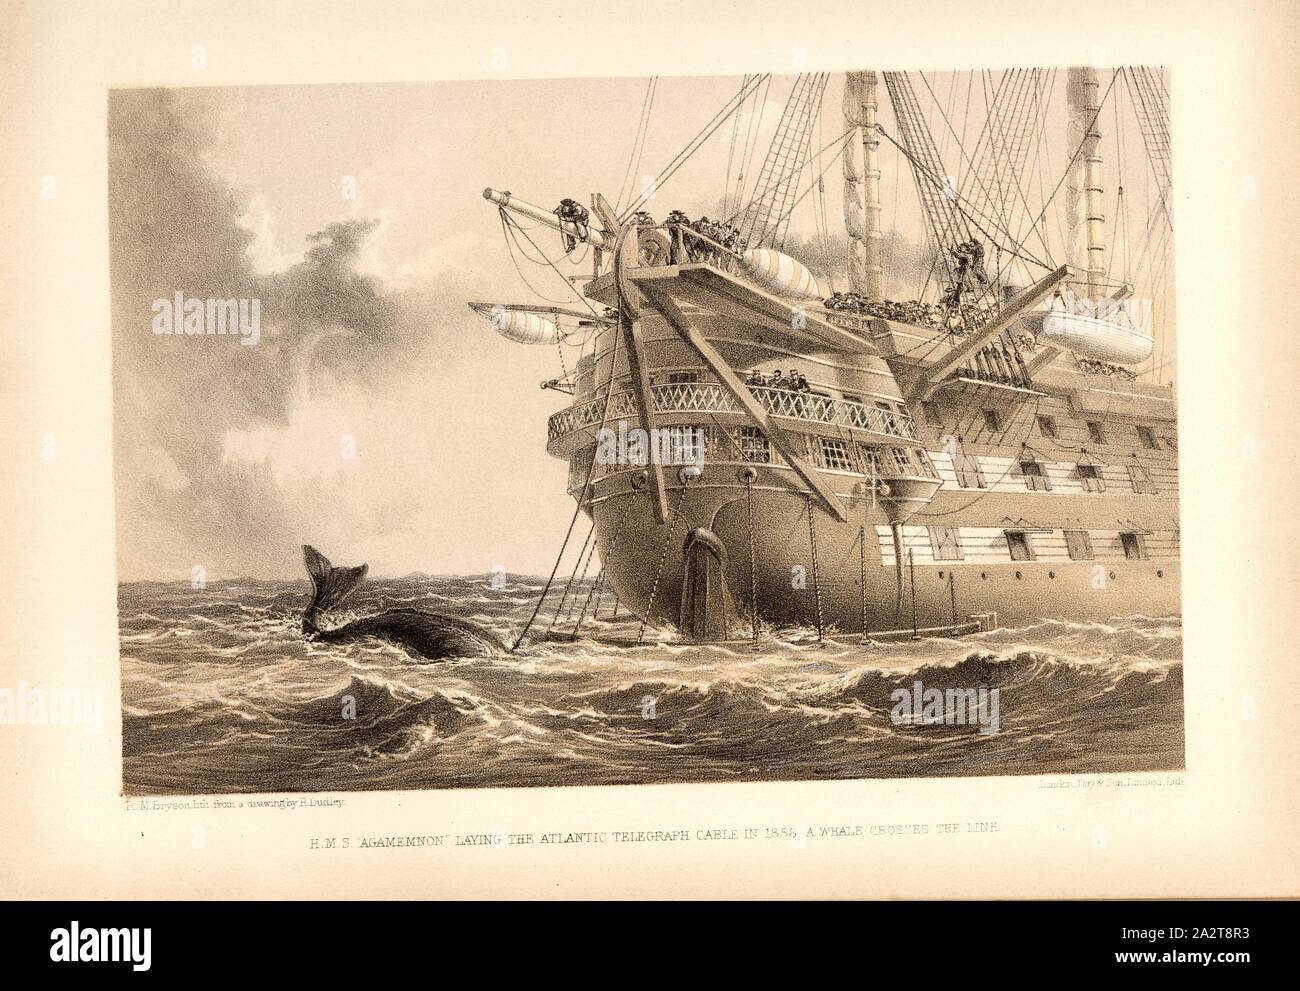 H.M.S. Agamemnon laying the Atlantic telegraph cable in 1858. A whale crosses the line., Warship HMS Agamemnon laying the transatlantic cable 1858, Signed: R. M. Bryson, lith., from a drawing by R. Dudley; Day & Son, Limited, Lith, Fig. 5, according to p. 30, Dudley, Robert (ill.); Bryson, R. M. (lith.); Day & Co (lith.), 1866, William Howard Russell; Robert Dudley: The atlantic telegraph. Dedicated by special permission to His Royal Highness Albert Edward Prince of Wales. London: Day and son Limited, [1866 Stock Photo